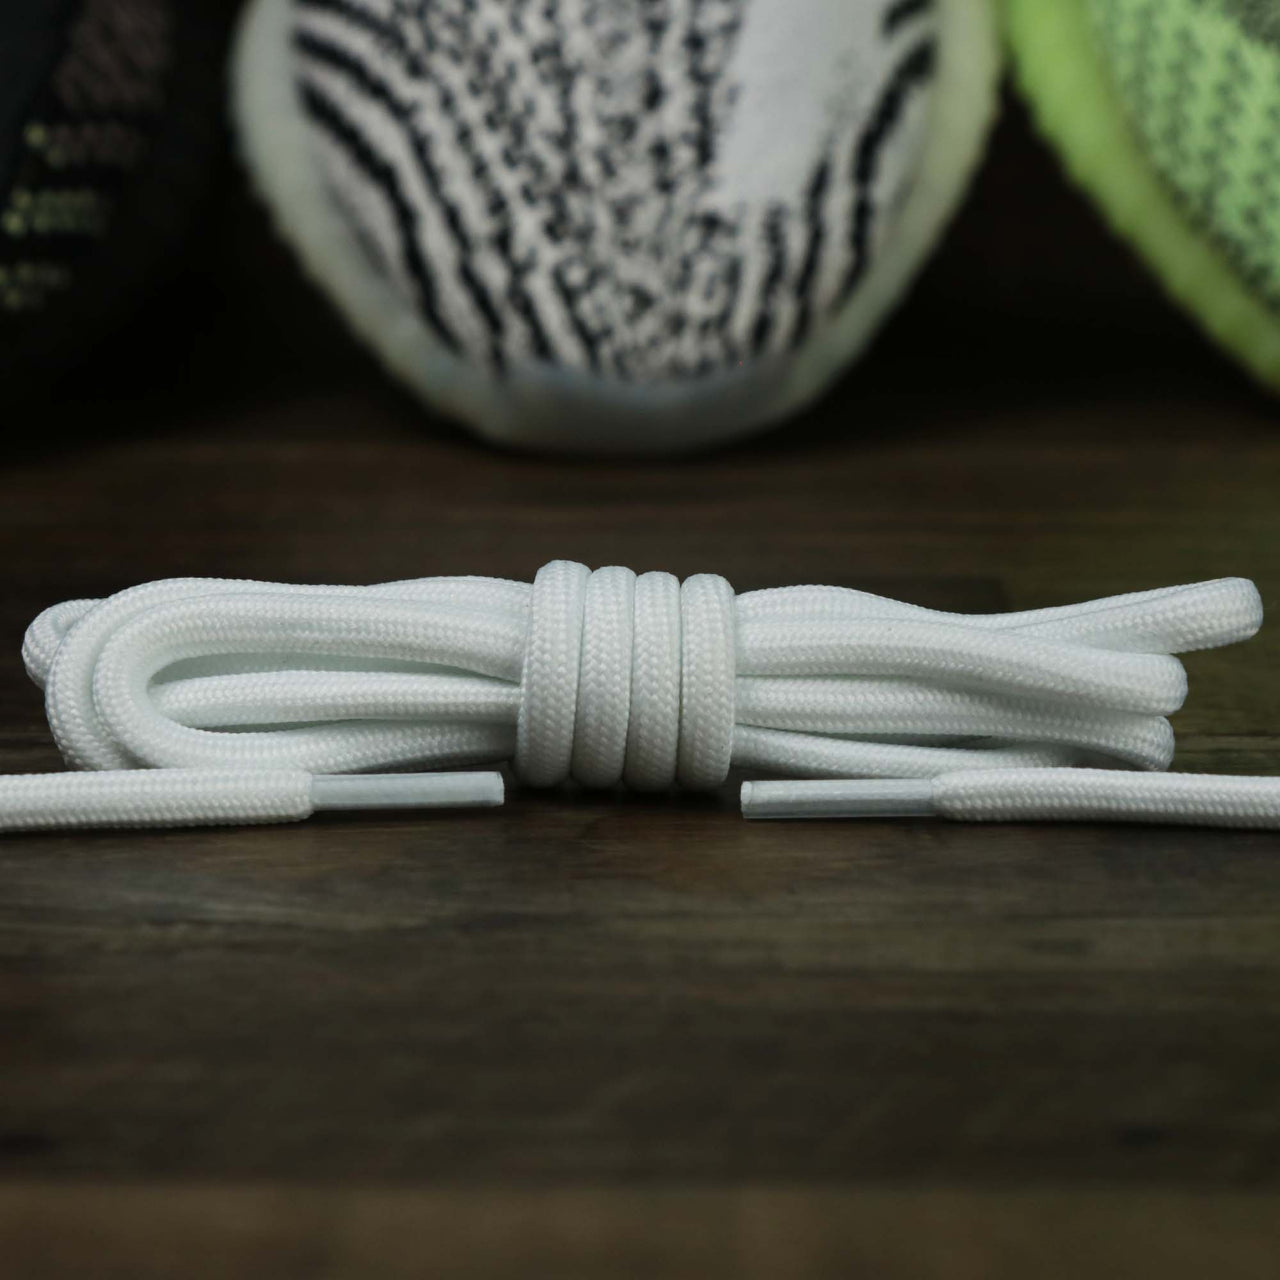 The 3M Reflective White Solid Shoelaces with White Aglets | 120cm Capswag unfolded